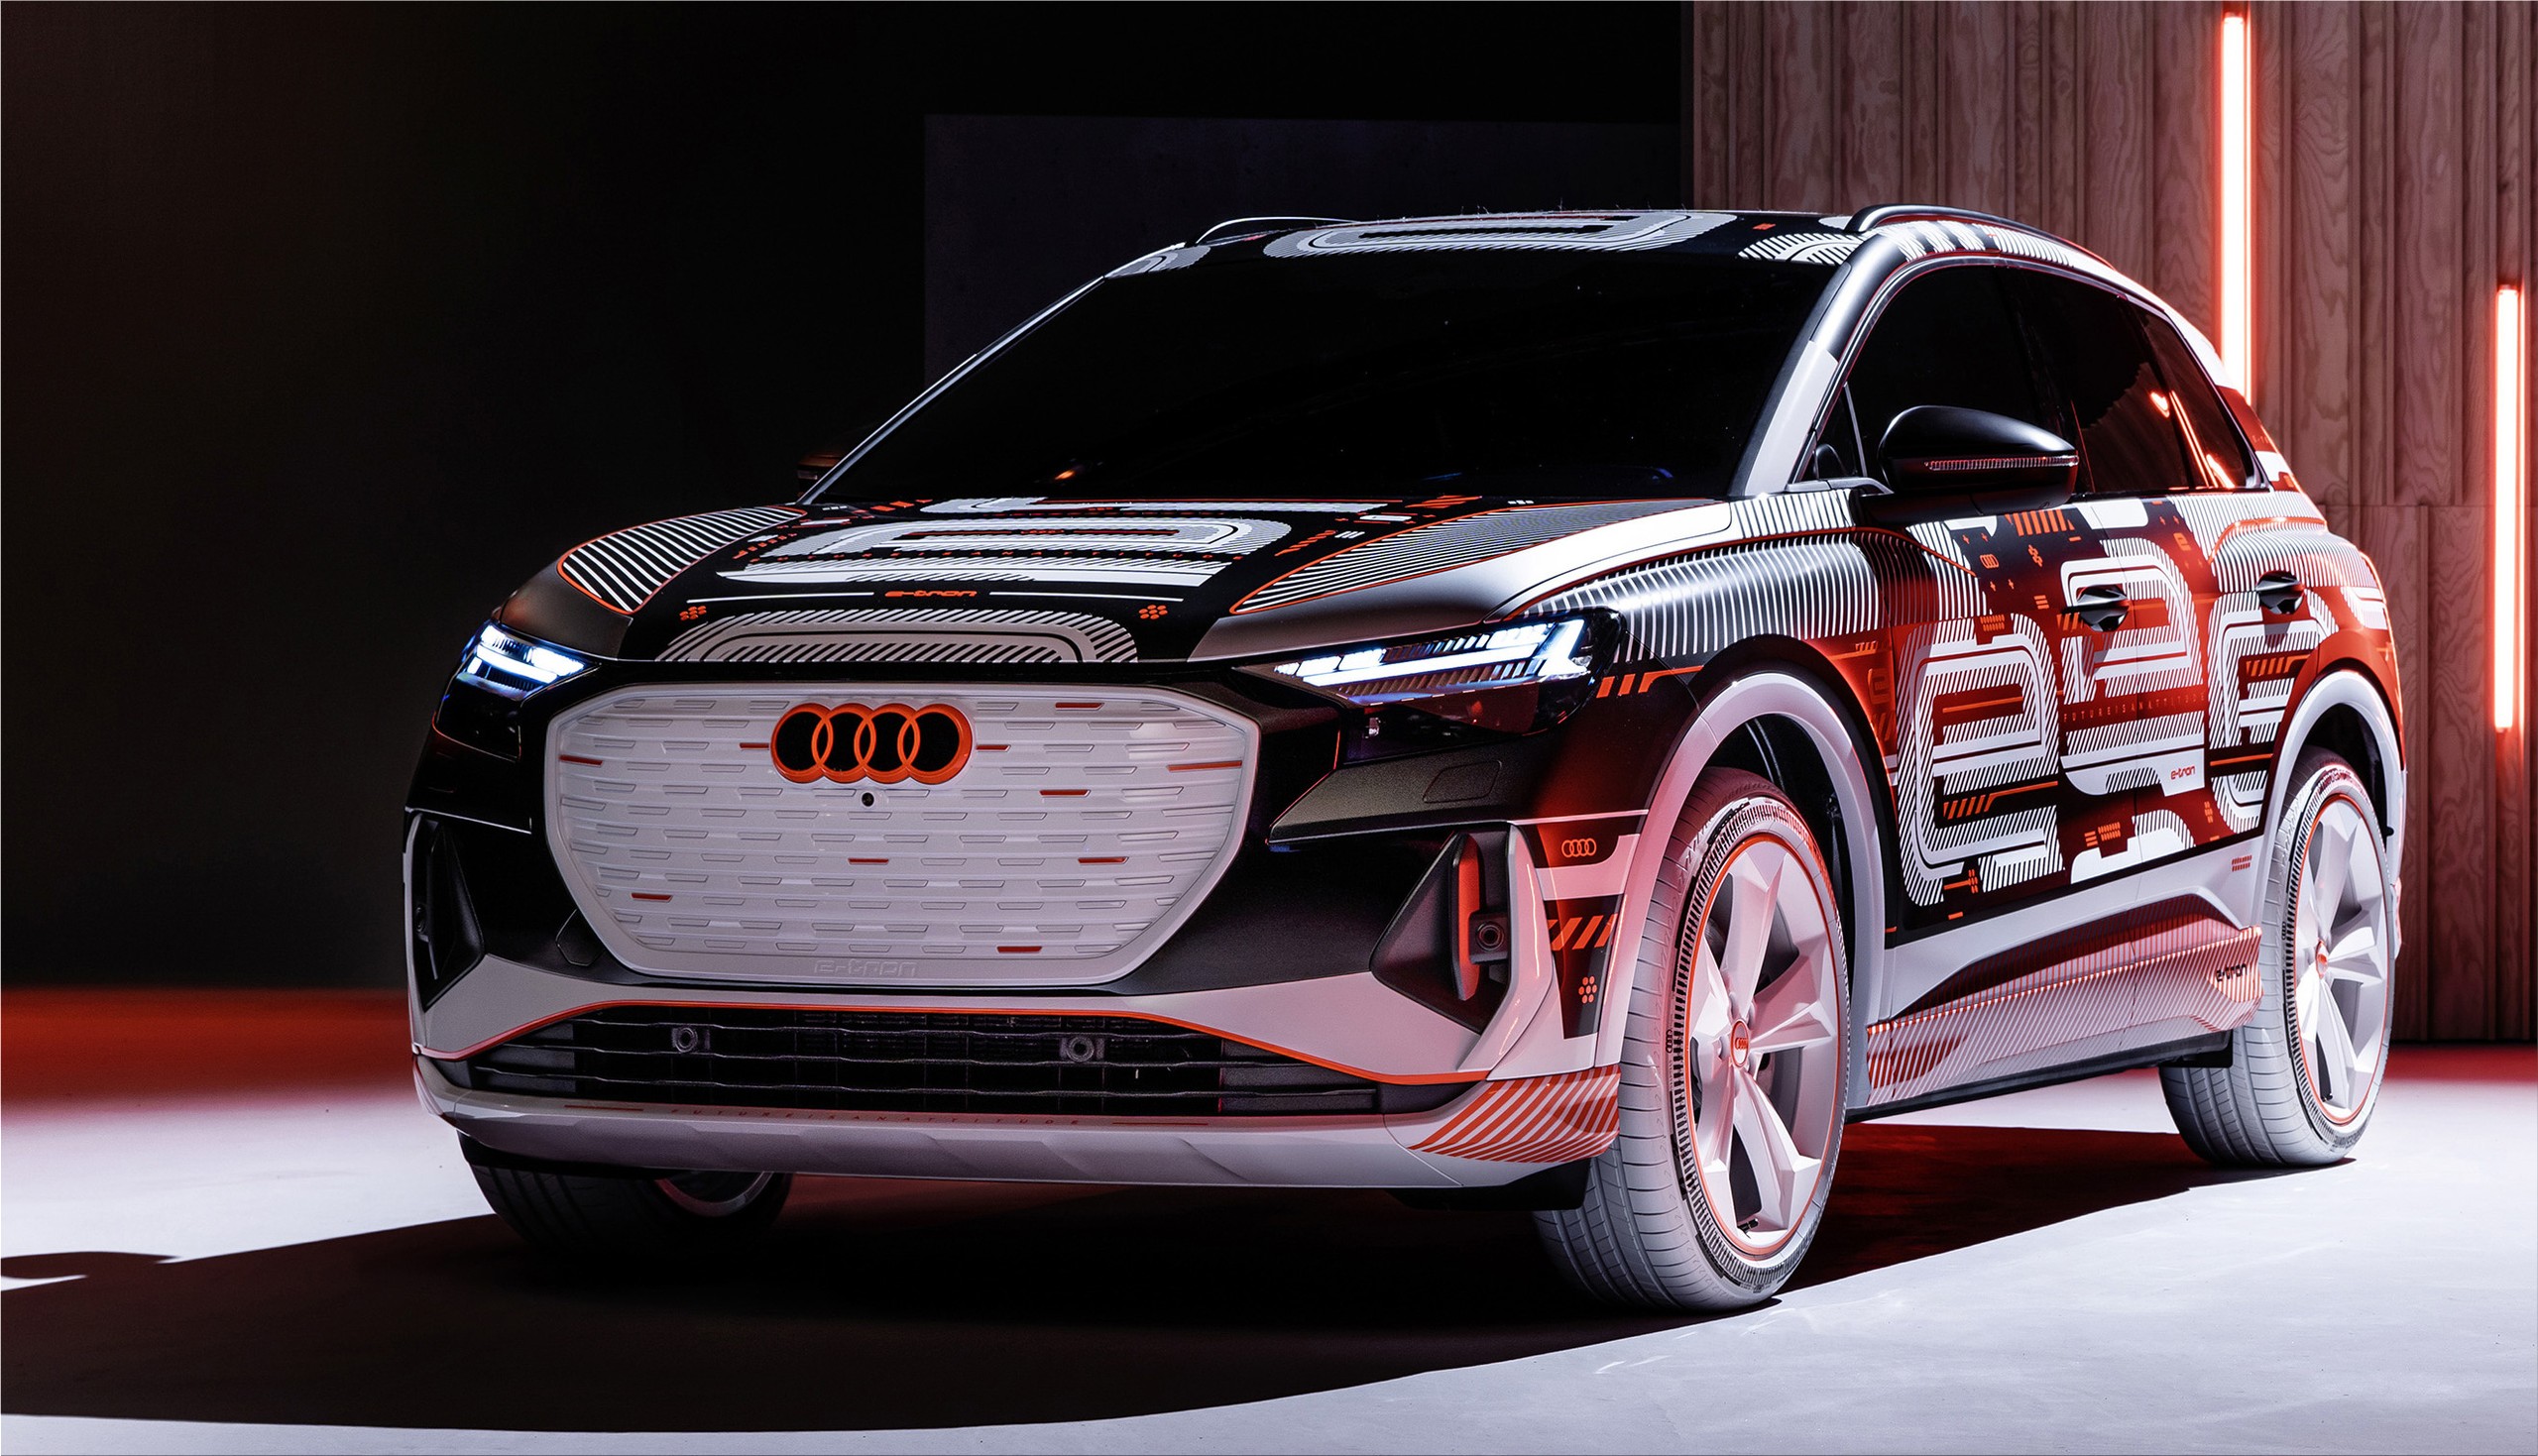 Production of the Audi Q4 etron electric SUV has started Electric Hunter